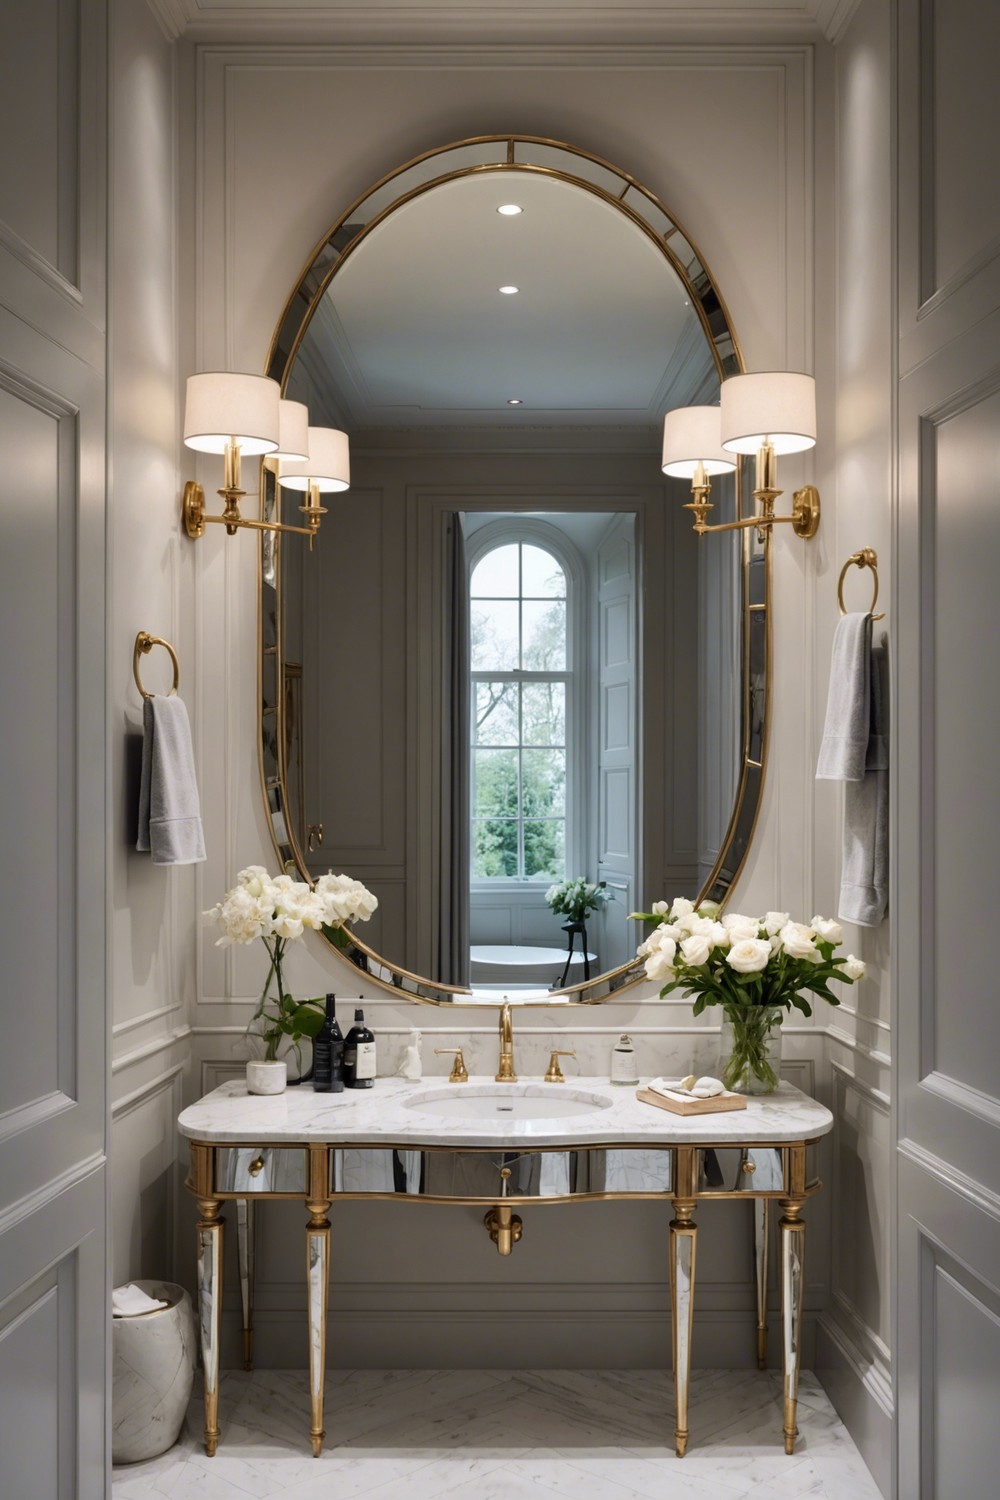 Oversized Oval Mirrors for a Dramatic Touch